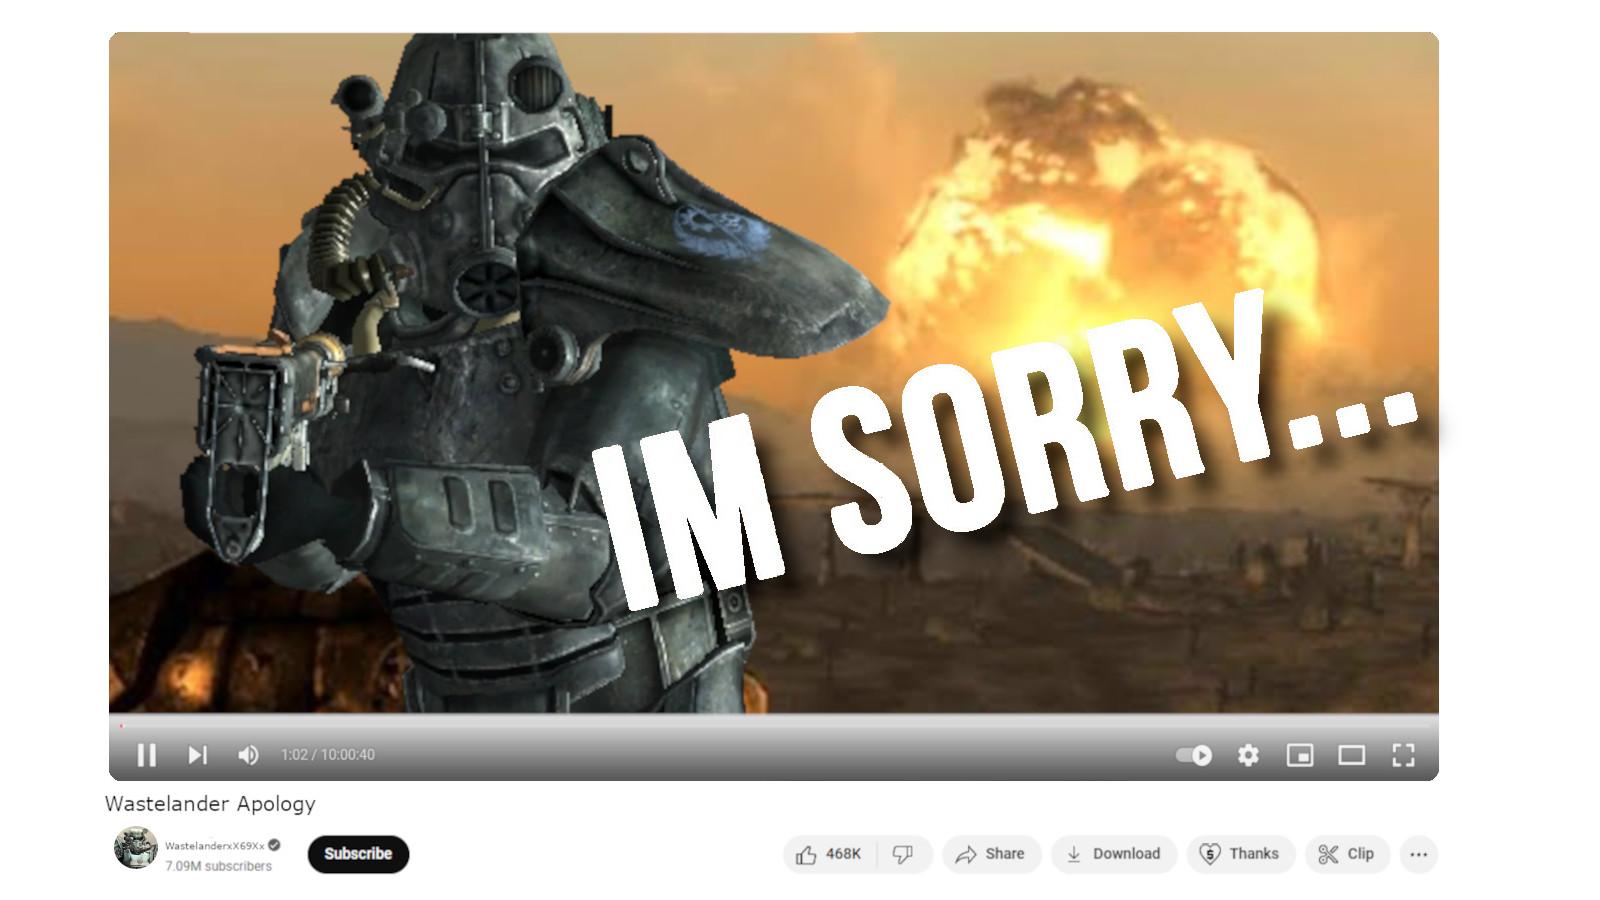 A man in power armor makes an apology for something while an atomic bomb detonates in the background.